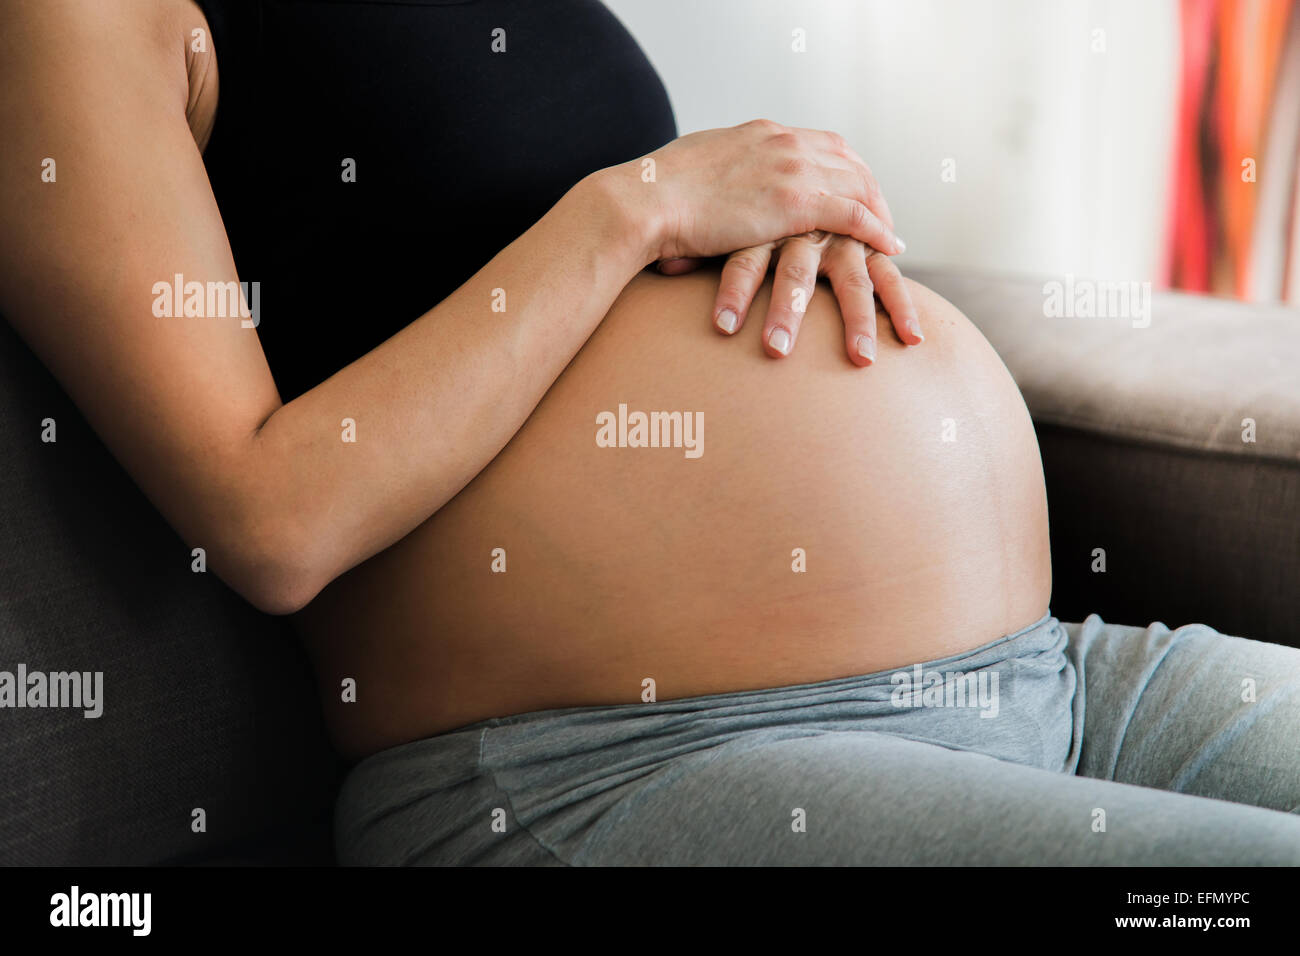 Baby bump, Image of 8 month pregnant woman sitting on a couch holding her bump belly Stock Photo